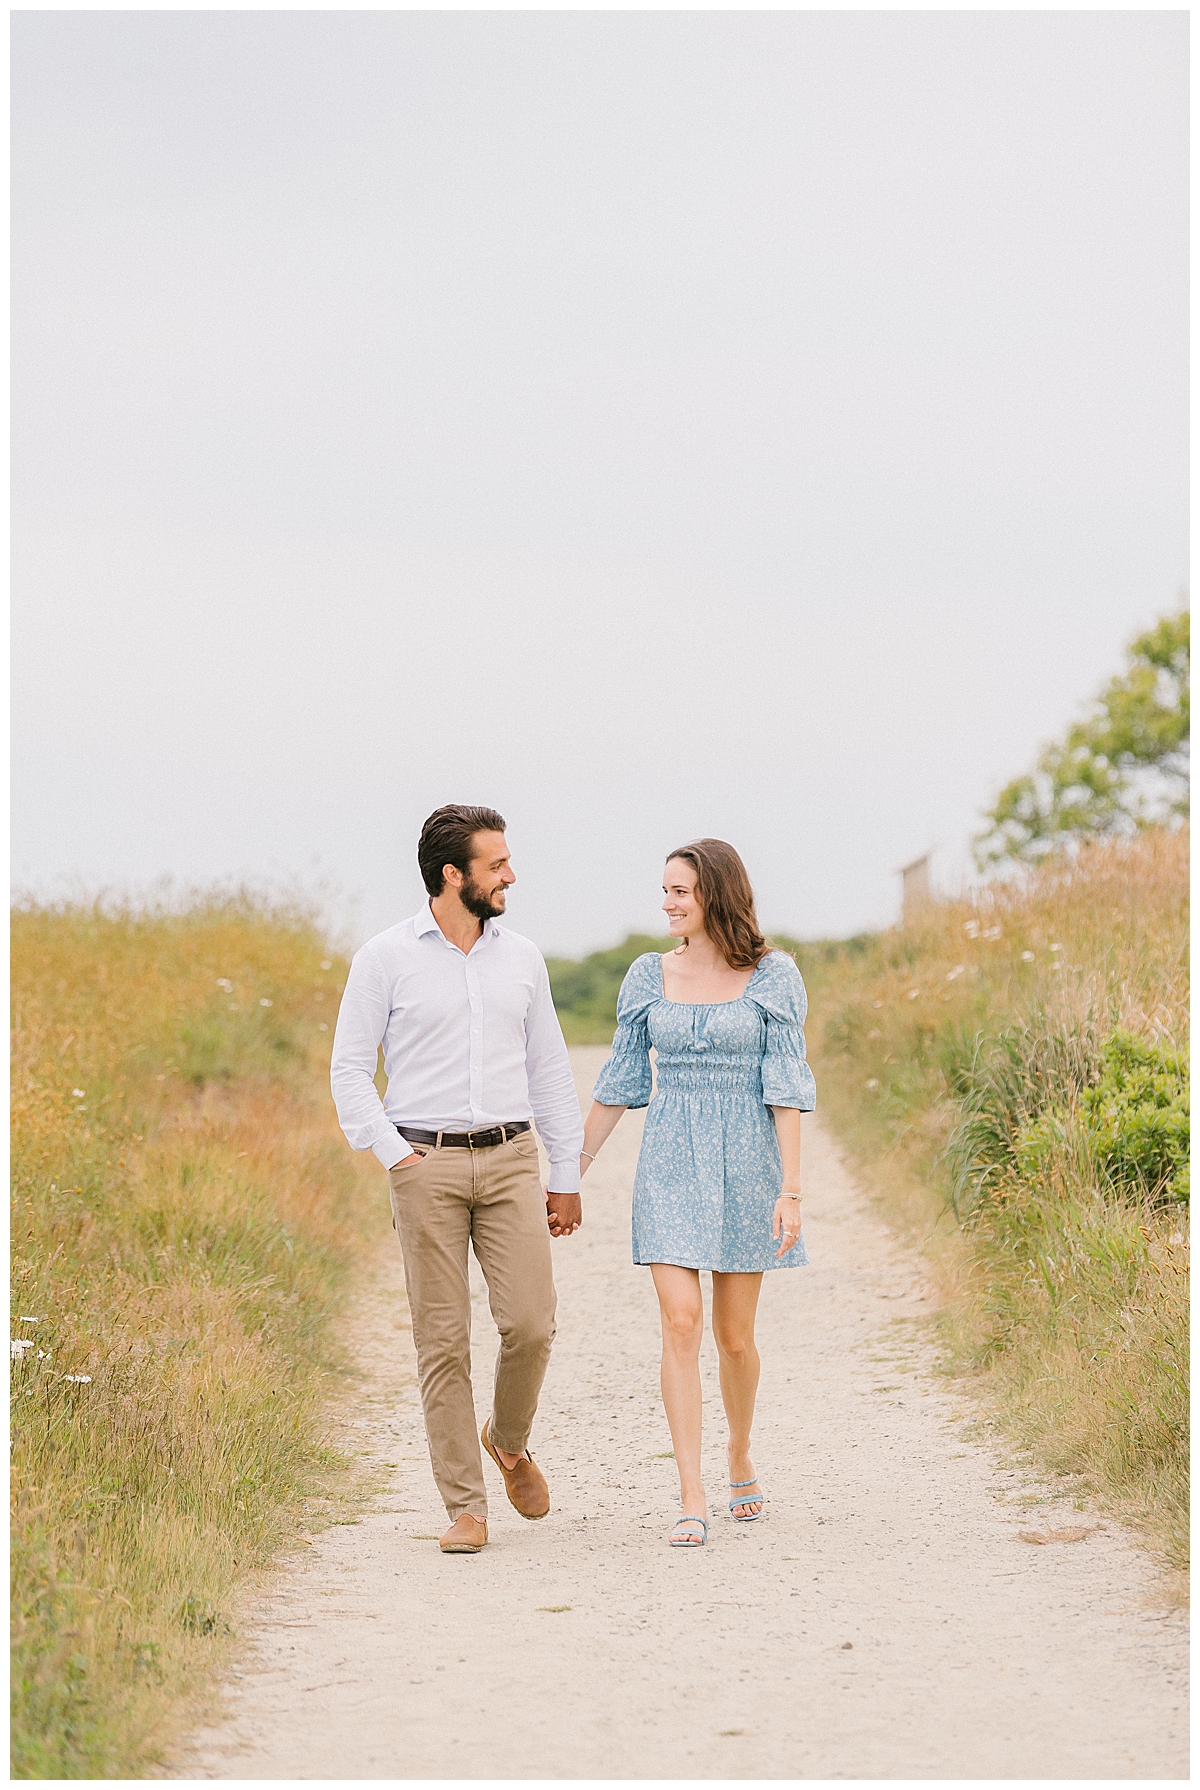 Jane and Richard's Nantucket Engagement in the Moors